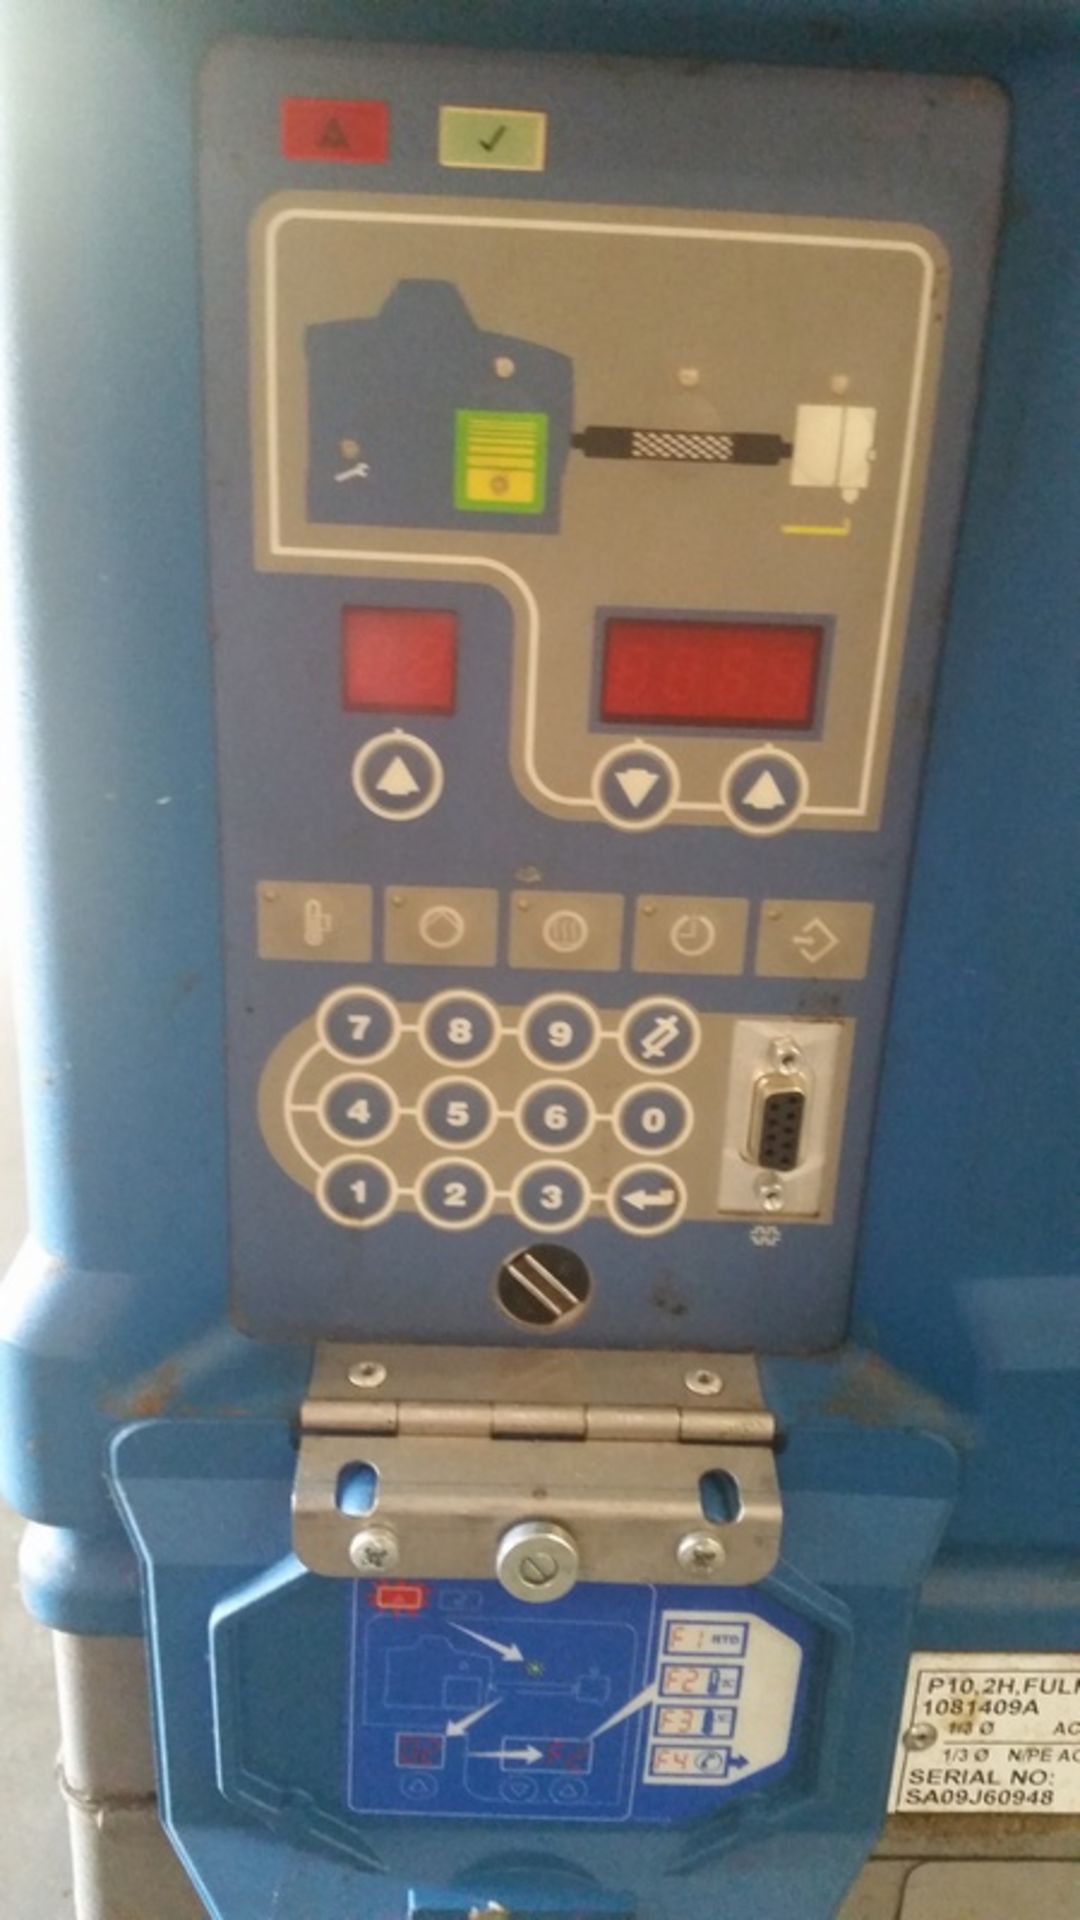 Nordson ProBlue 10 FulFill Model: 1081409A Serial: SA09J60948200-240 Volt 50/60 Hz 27 A (Located - Image 4 of 7